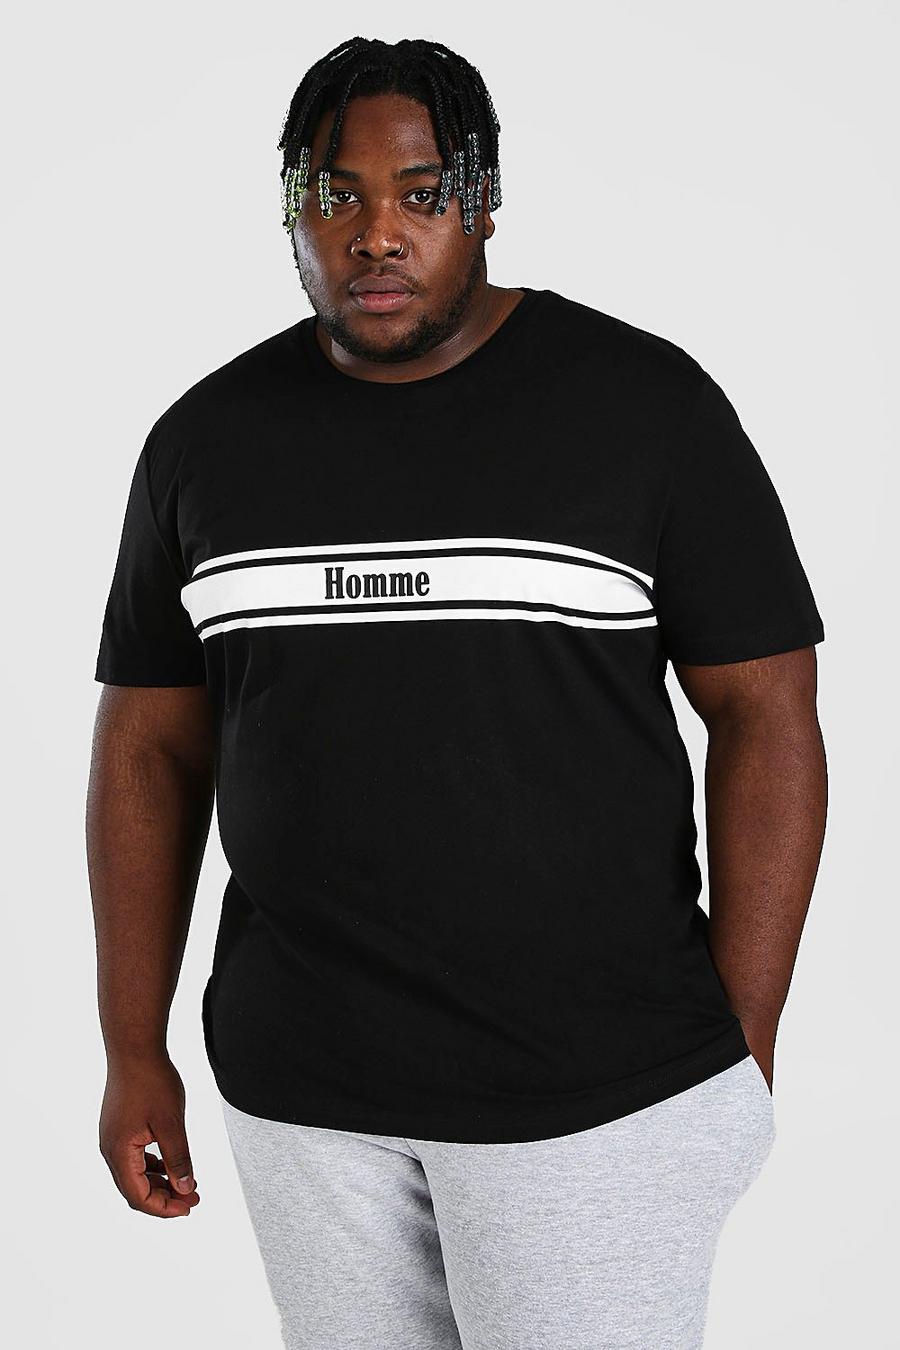 Black Plus Size Homme Graphic T-Shirt image number 1